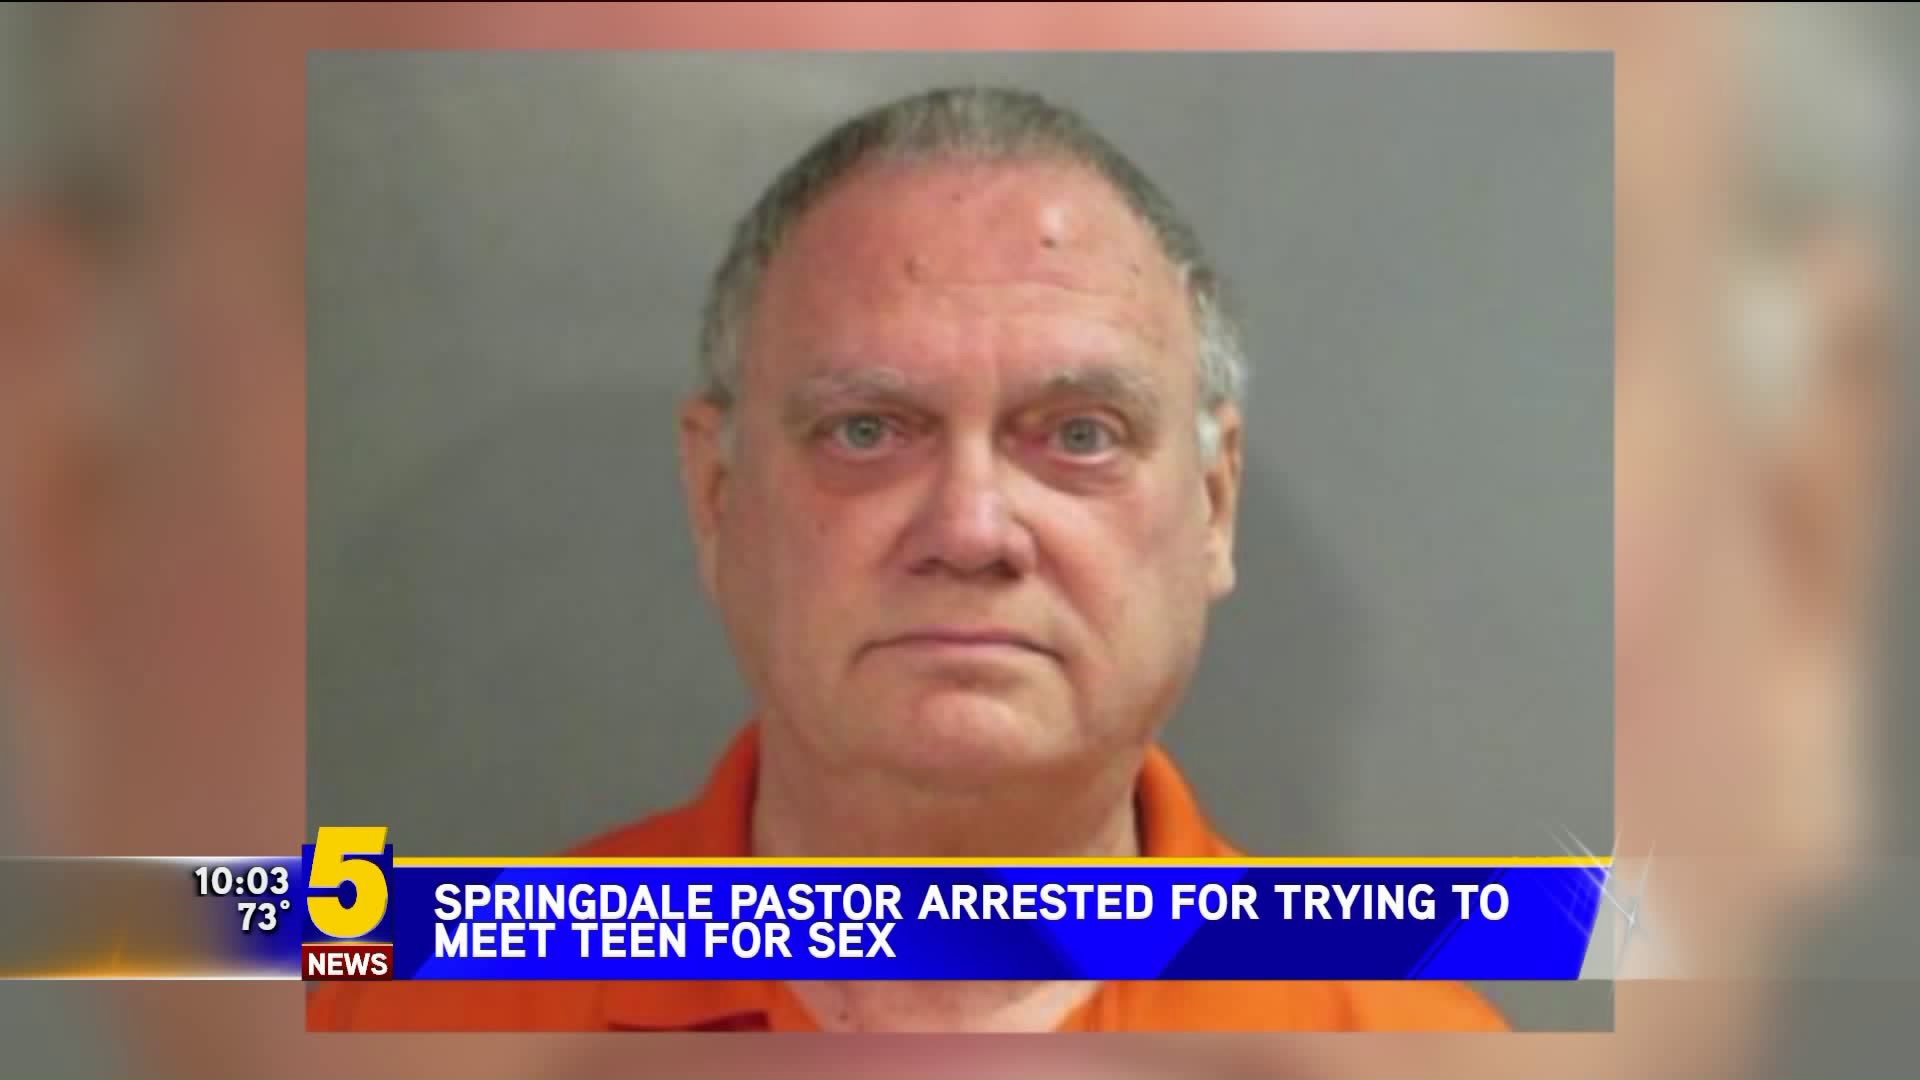 Local Pastor Arreested For Trying To Meet Teen For Sex